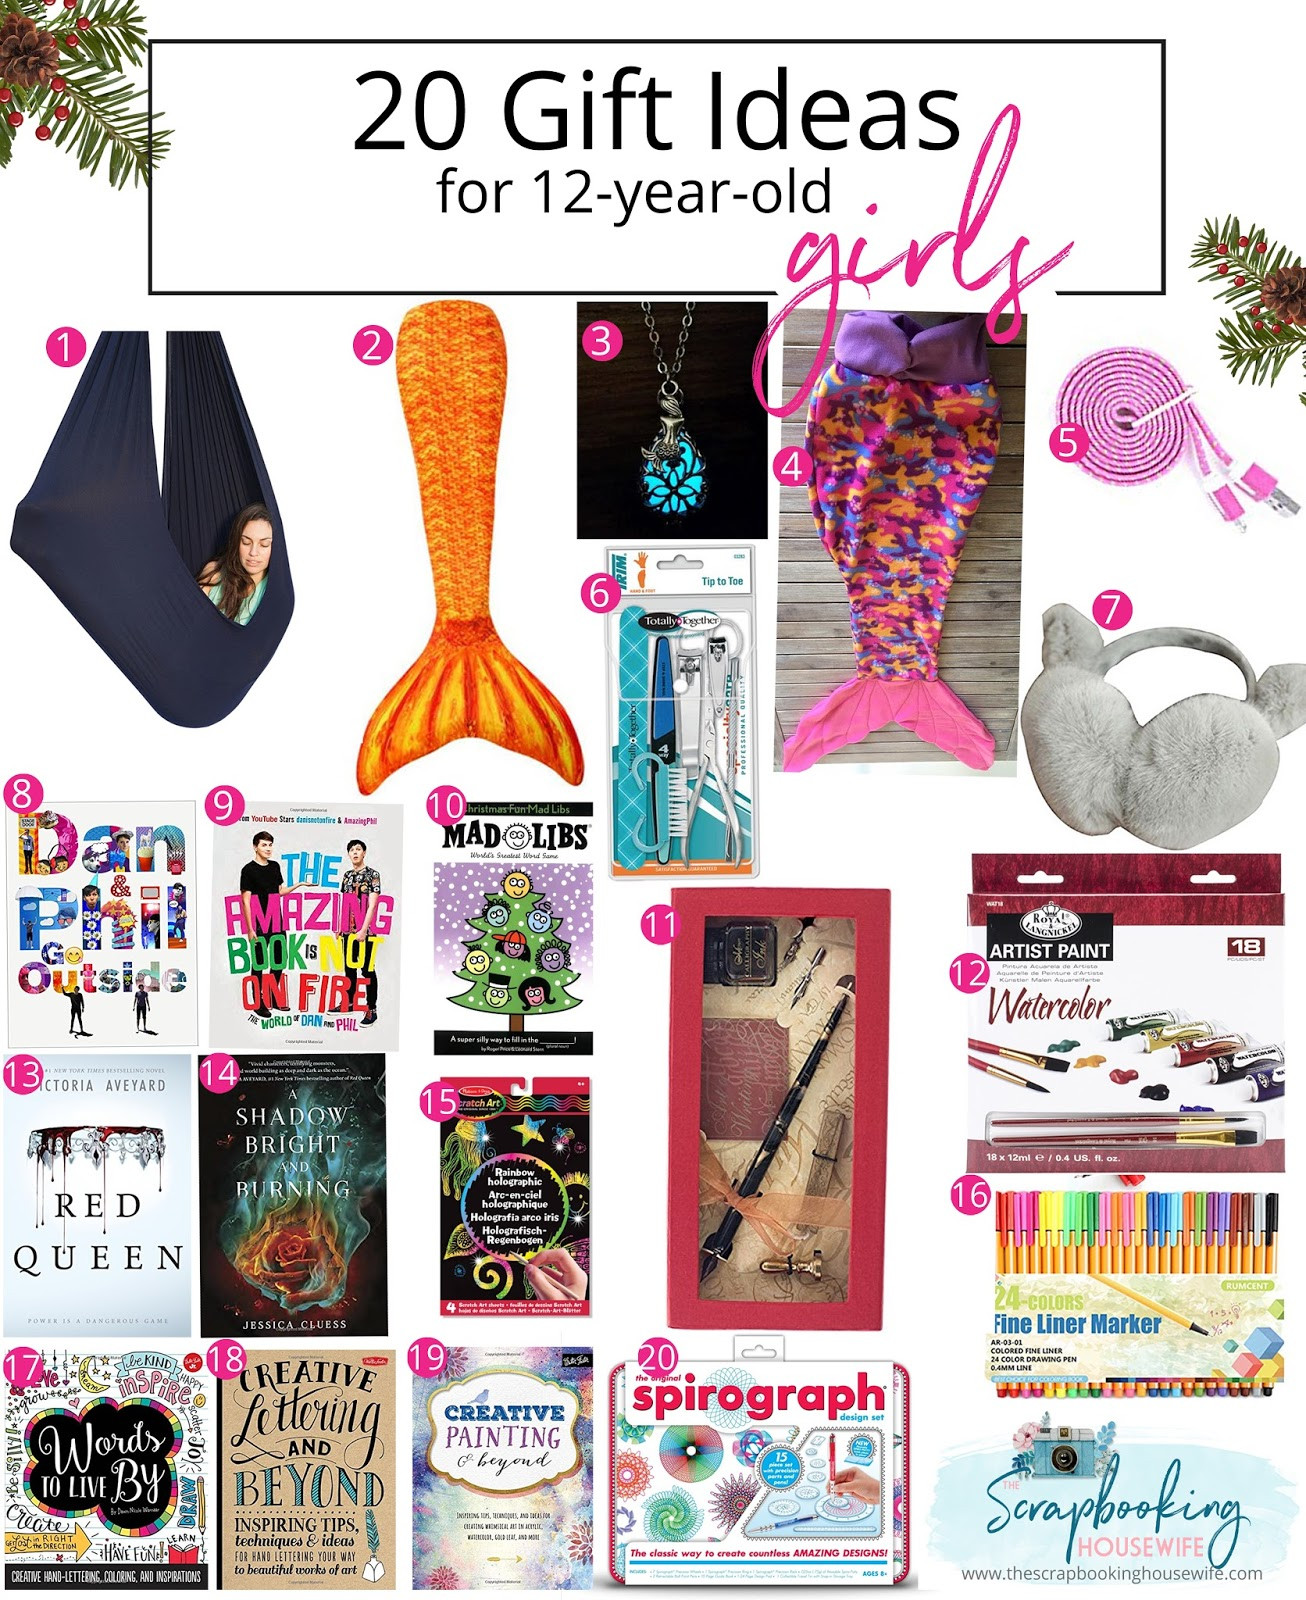 Birthday Gift Ideas For 12 Year Old Girls
 Ellabella Designs 20 GIFT IDEAS FOR 12 YEAR OLD TWEEN